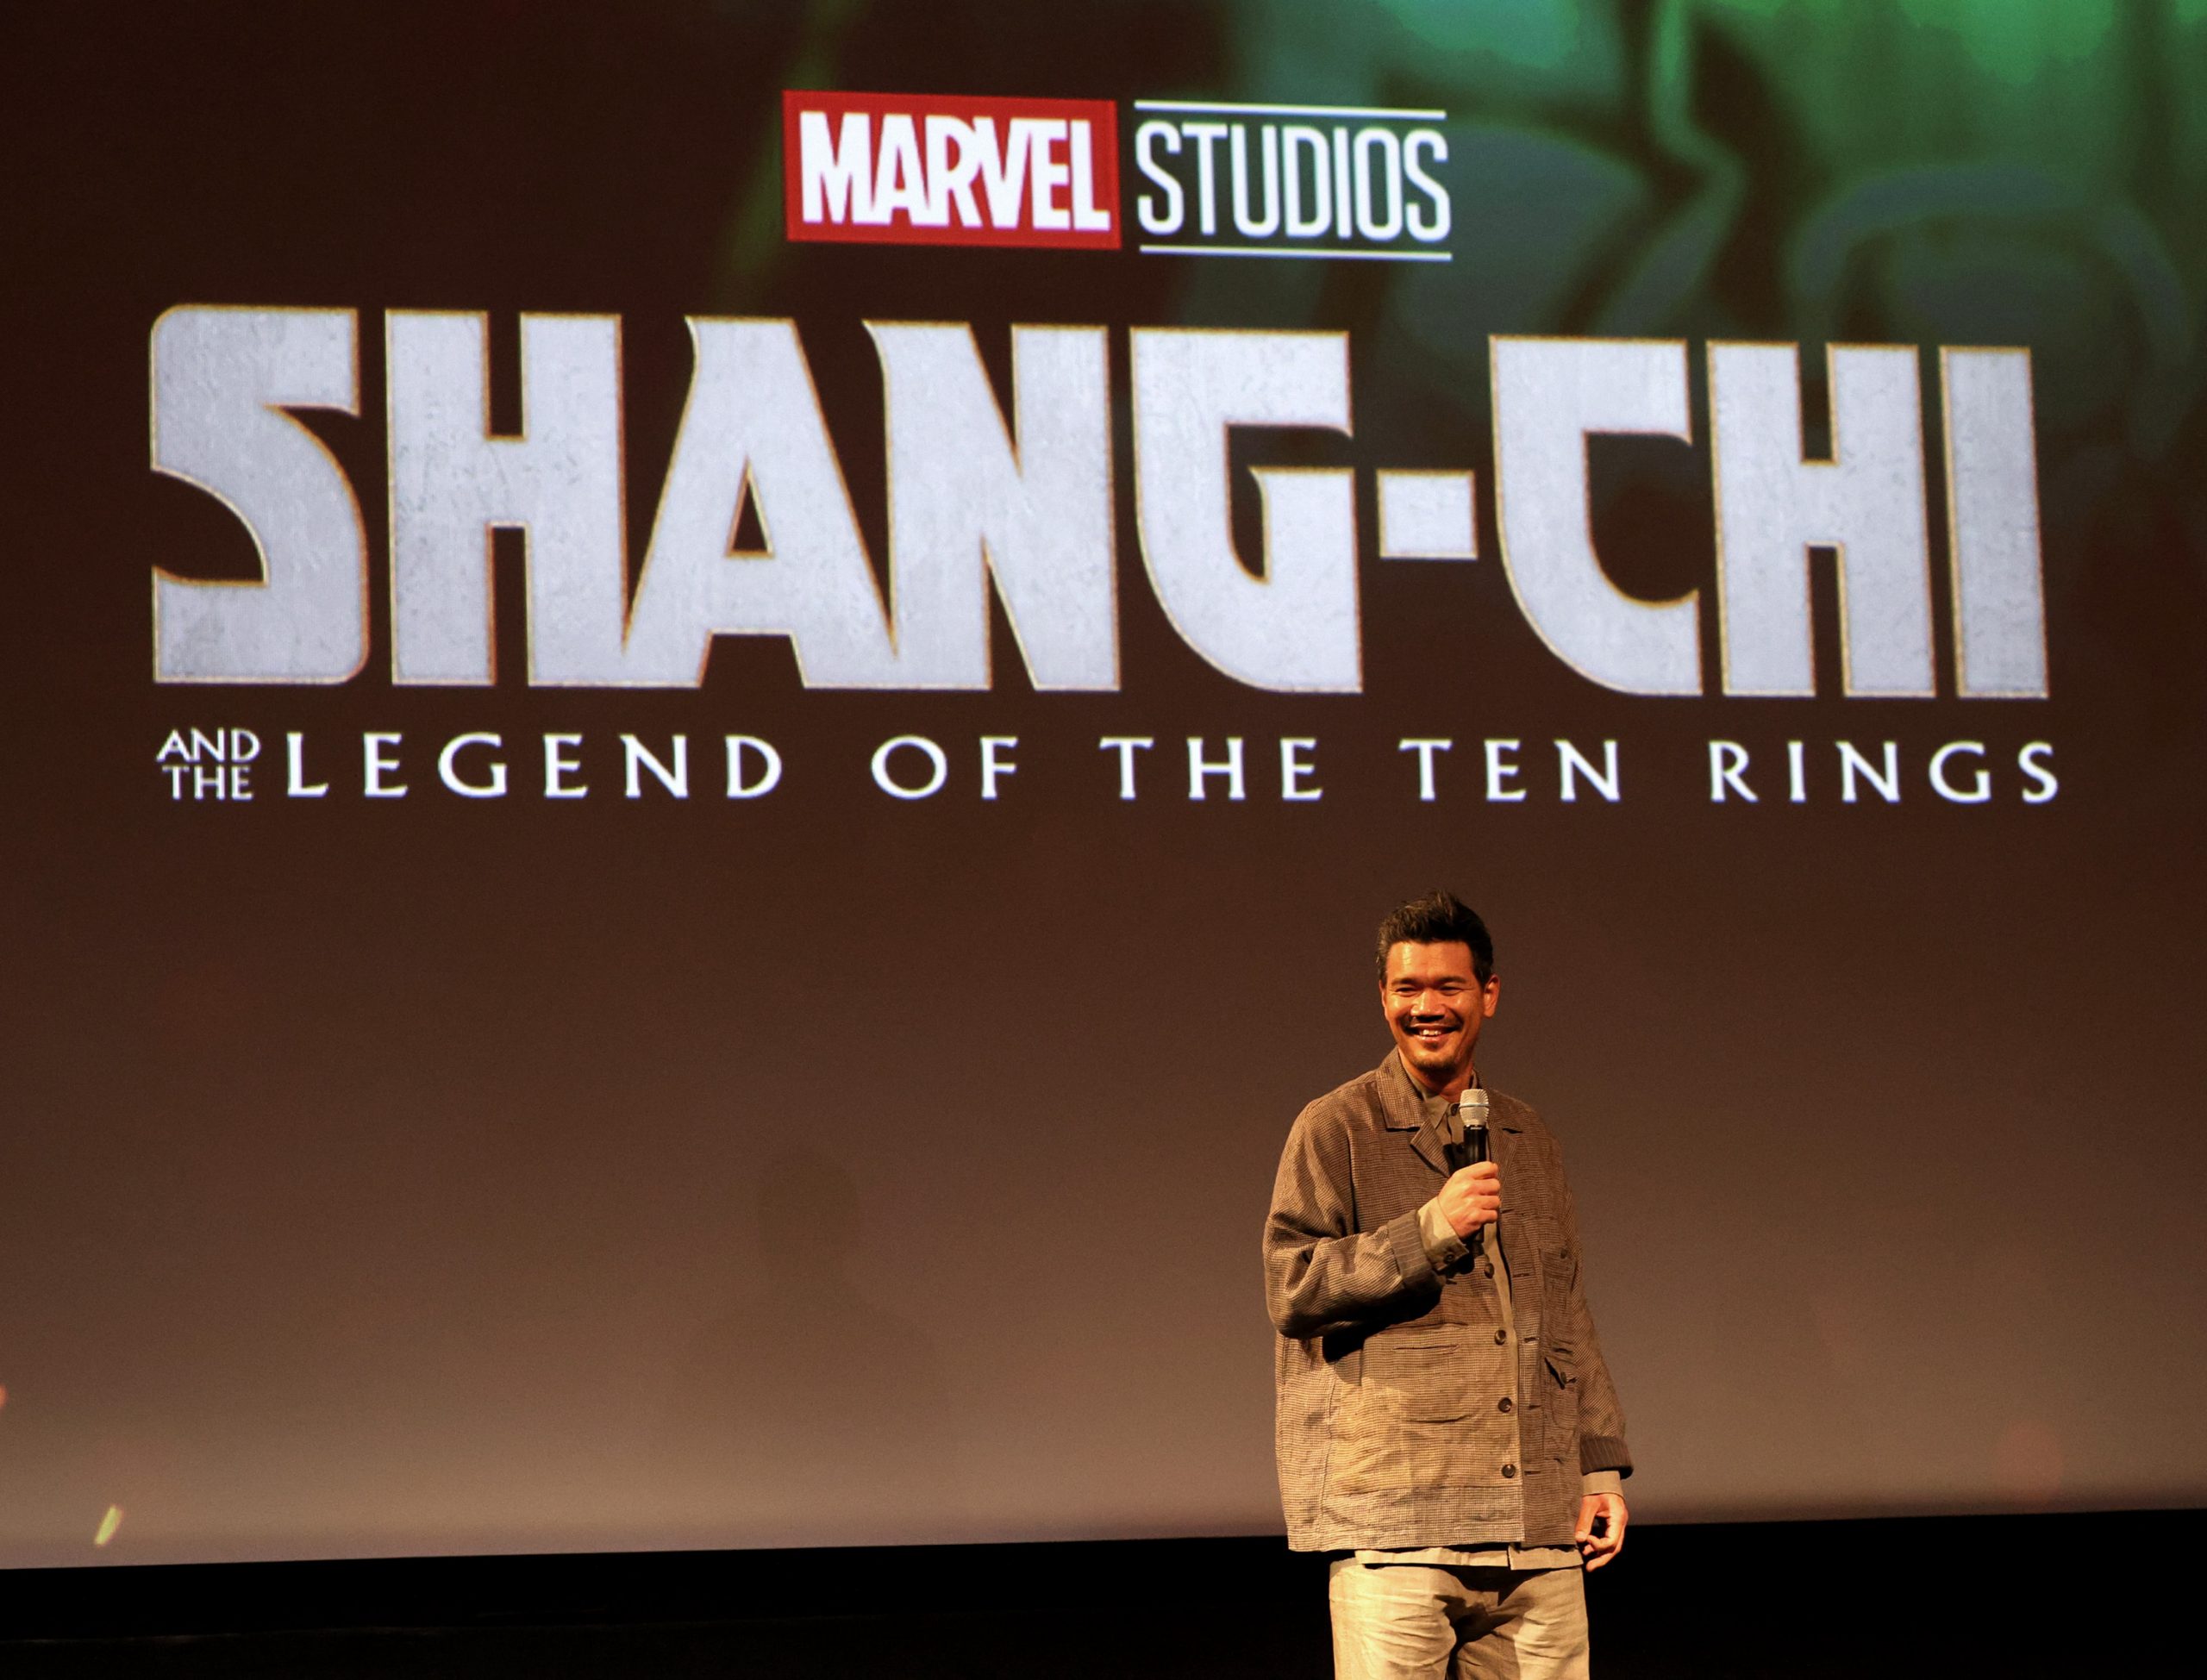 ‘Shang-Chi’ Earns Second Biggest Domestic Opening of 2021 at the Box Office With $83M Over Labor Day Weekend